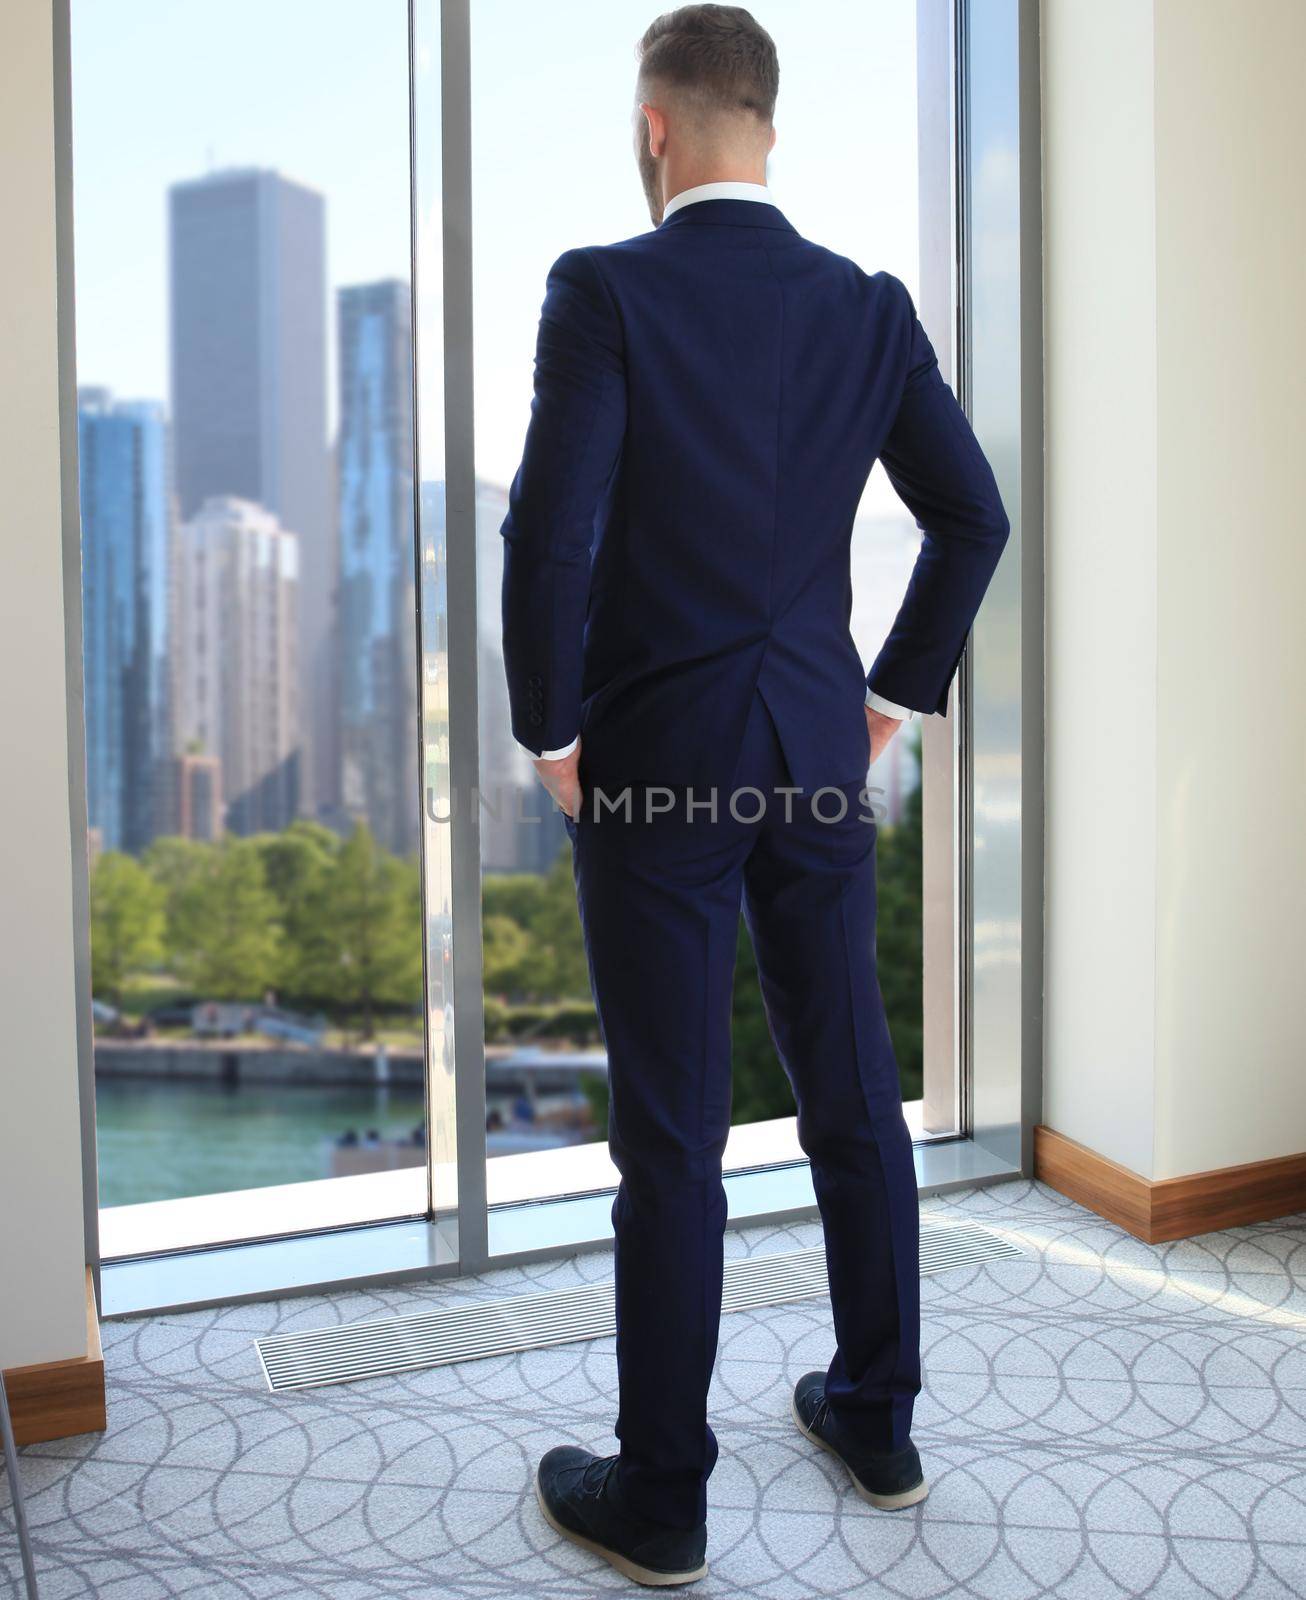 Back view of successful manager looking the city from his office